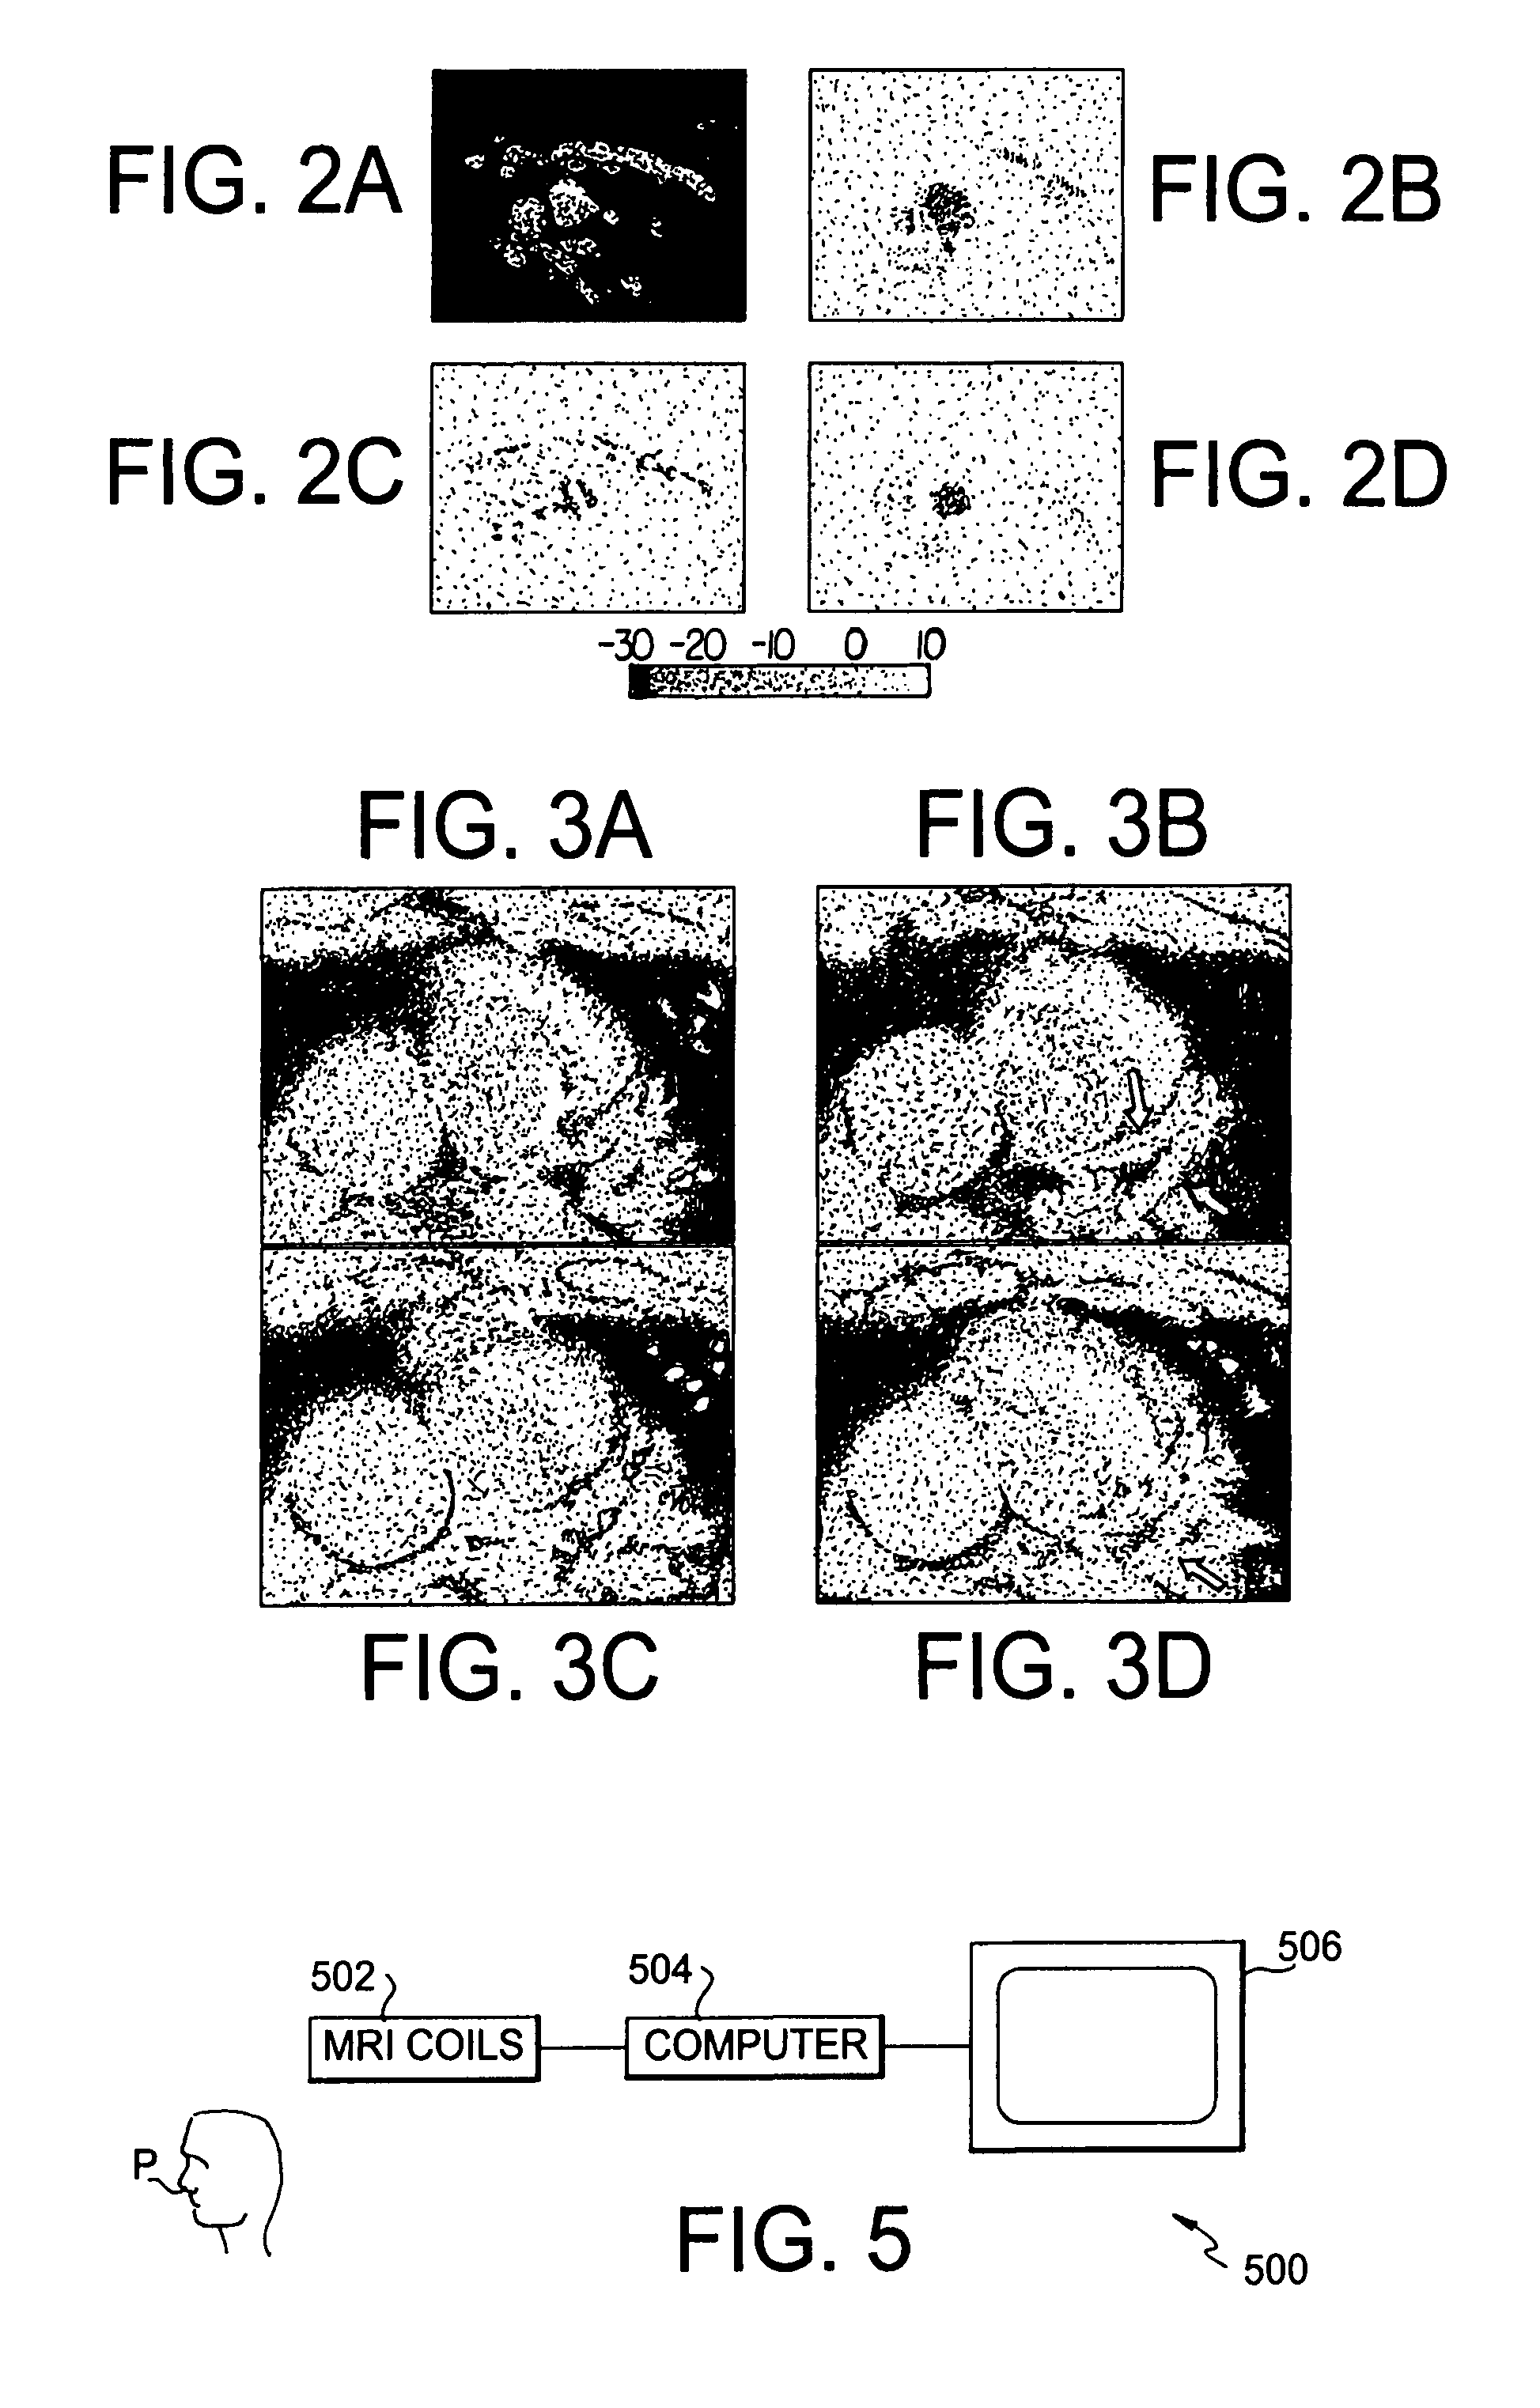 Fast automatic linear off-resonance correction method for spiral imaging